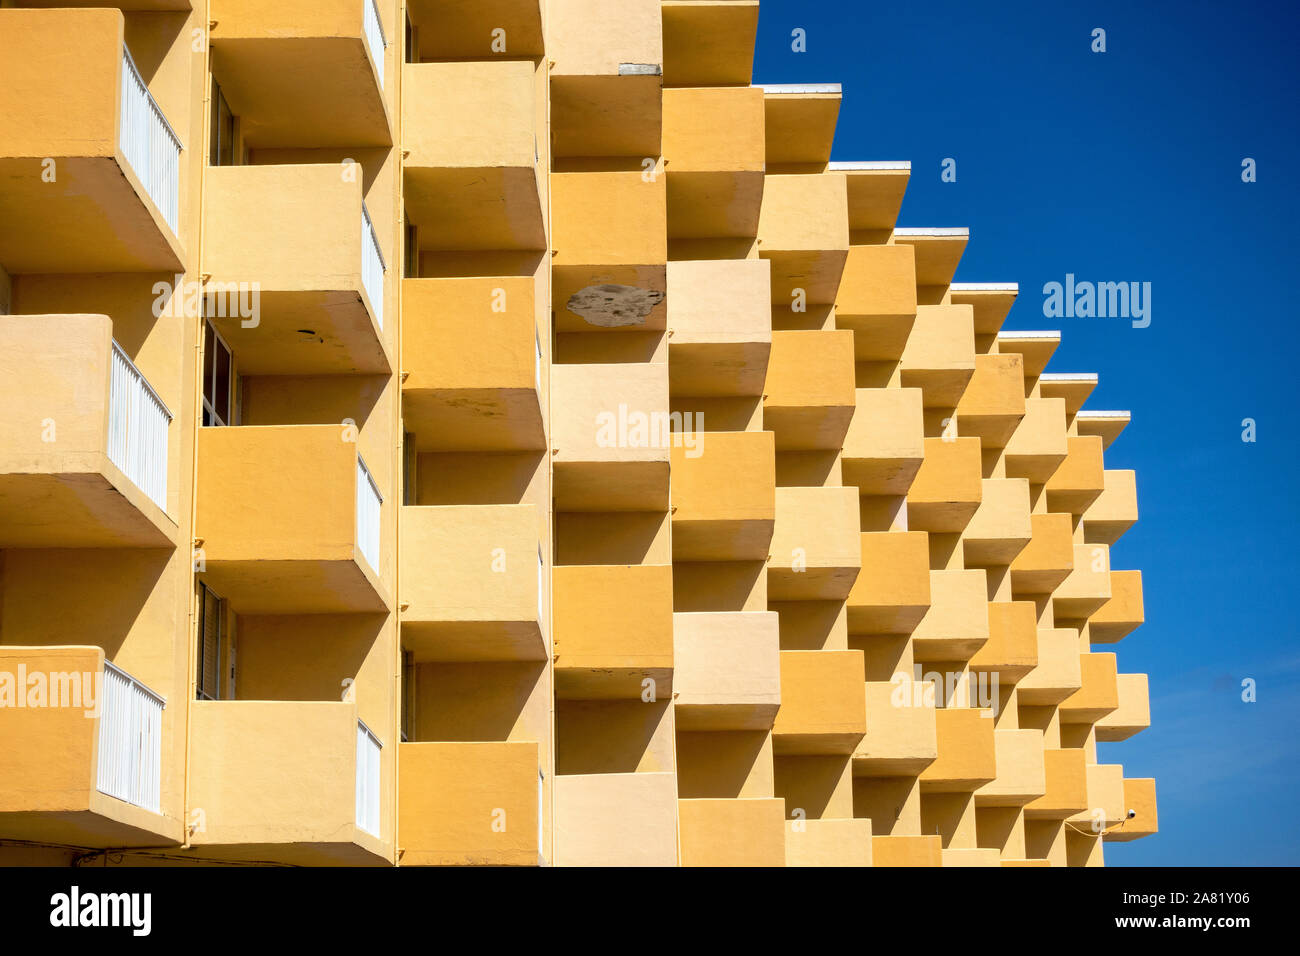 Sixties Architecture With Geometric Abstract Pattern Shapes From The Balconies Of A Hotel On Atlantic Avenue Daytona Beach Florida USA Stock Photo